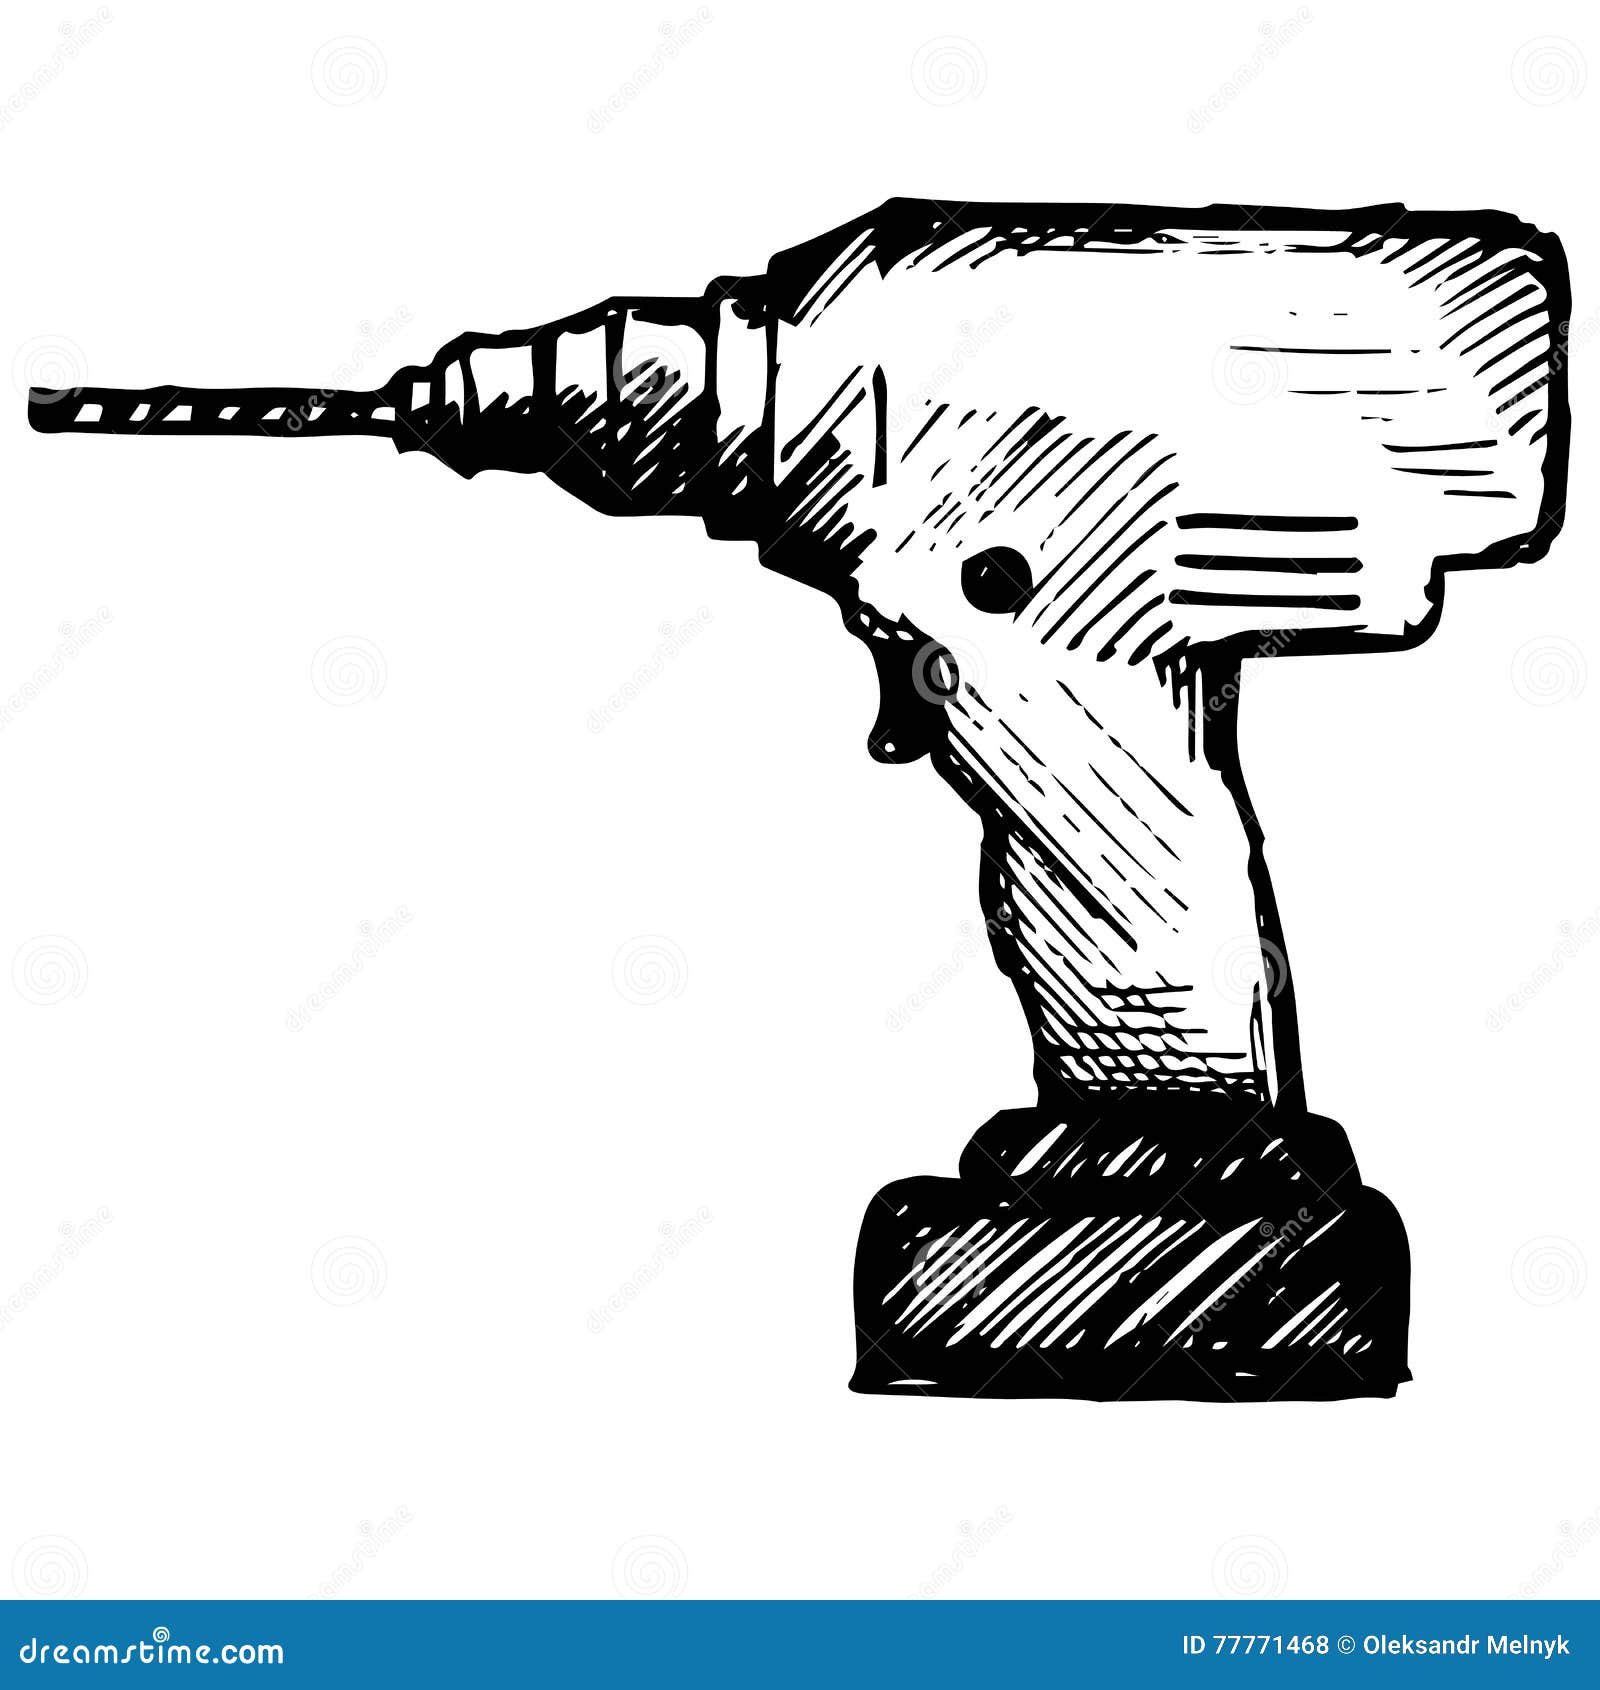 Cordless drill stock vector. Illustration of electric - 77771468